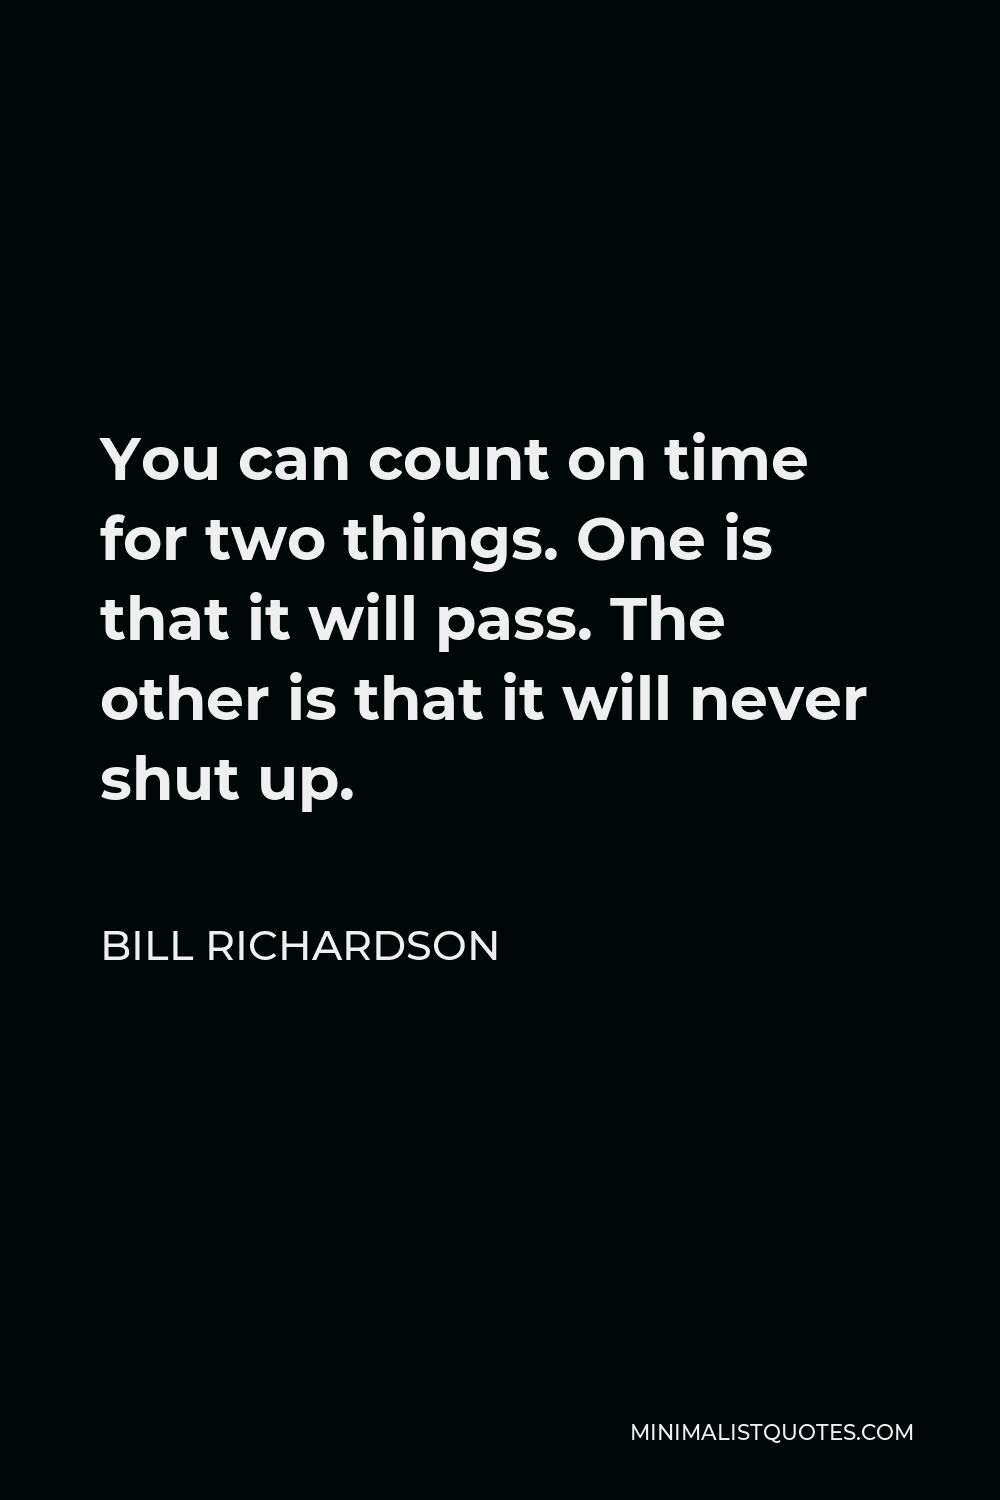 Bill Richardson Quote - You can count on time for two things. One is that it will pass. The other is that it will never shut up.